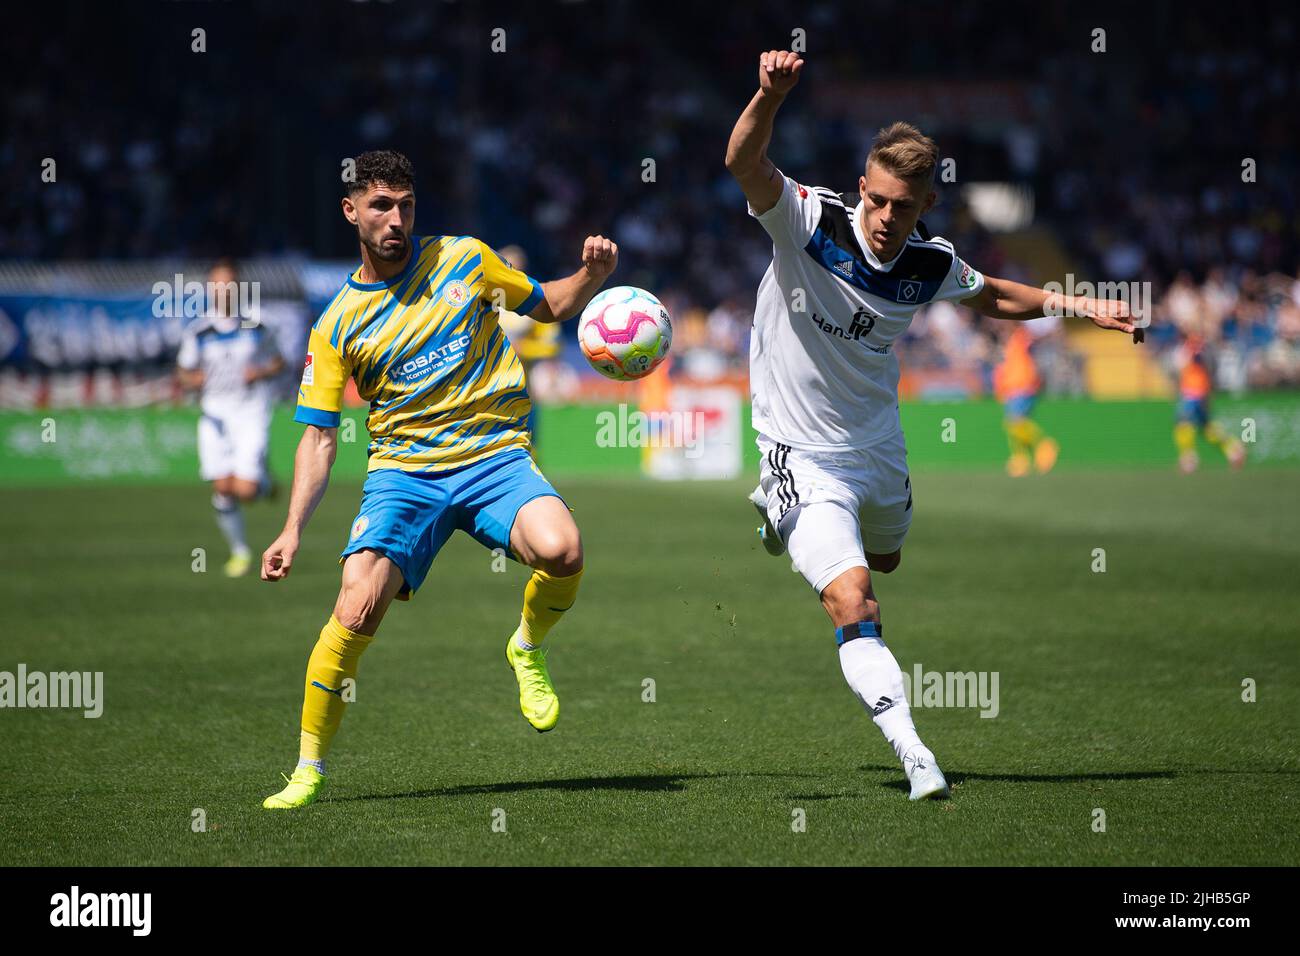 Brunswick, Germany. 17th July, 2022. Soccer: 2nd Bundesliga, Eintracht Braunschweig - Hamburger SV, Matchday 1, Eintracht Stadium. Hamburg's Miro Muheim (r) plays against Braunschweig's Fabio Kaufmann. Credit: Swen Pförtner/dpa - IMPORTANT NOTE: In accordance with the requirements of the DFL Deutsche Fußball Liga and the DFB Deutscher Fußball-Bund, it is prohibited to use or have used photographs taken in the stadium and/or of the match in the form of sequence pictures and/or video-like photo series./dpa/Alamy Live News Stock Photo